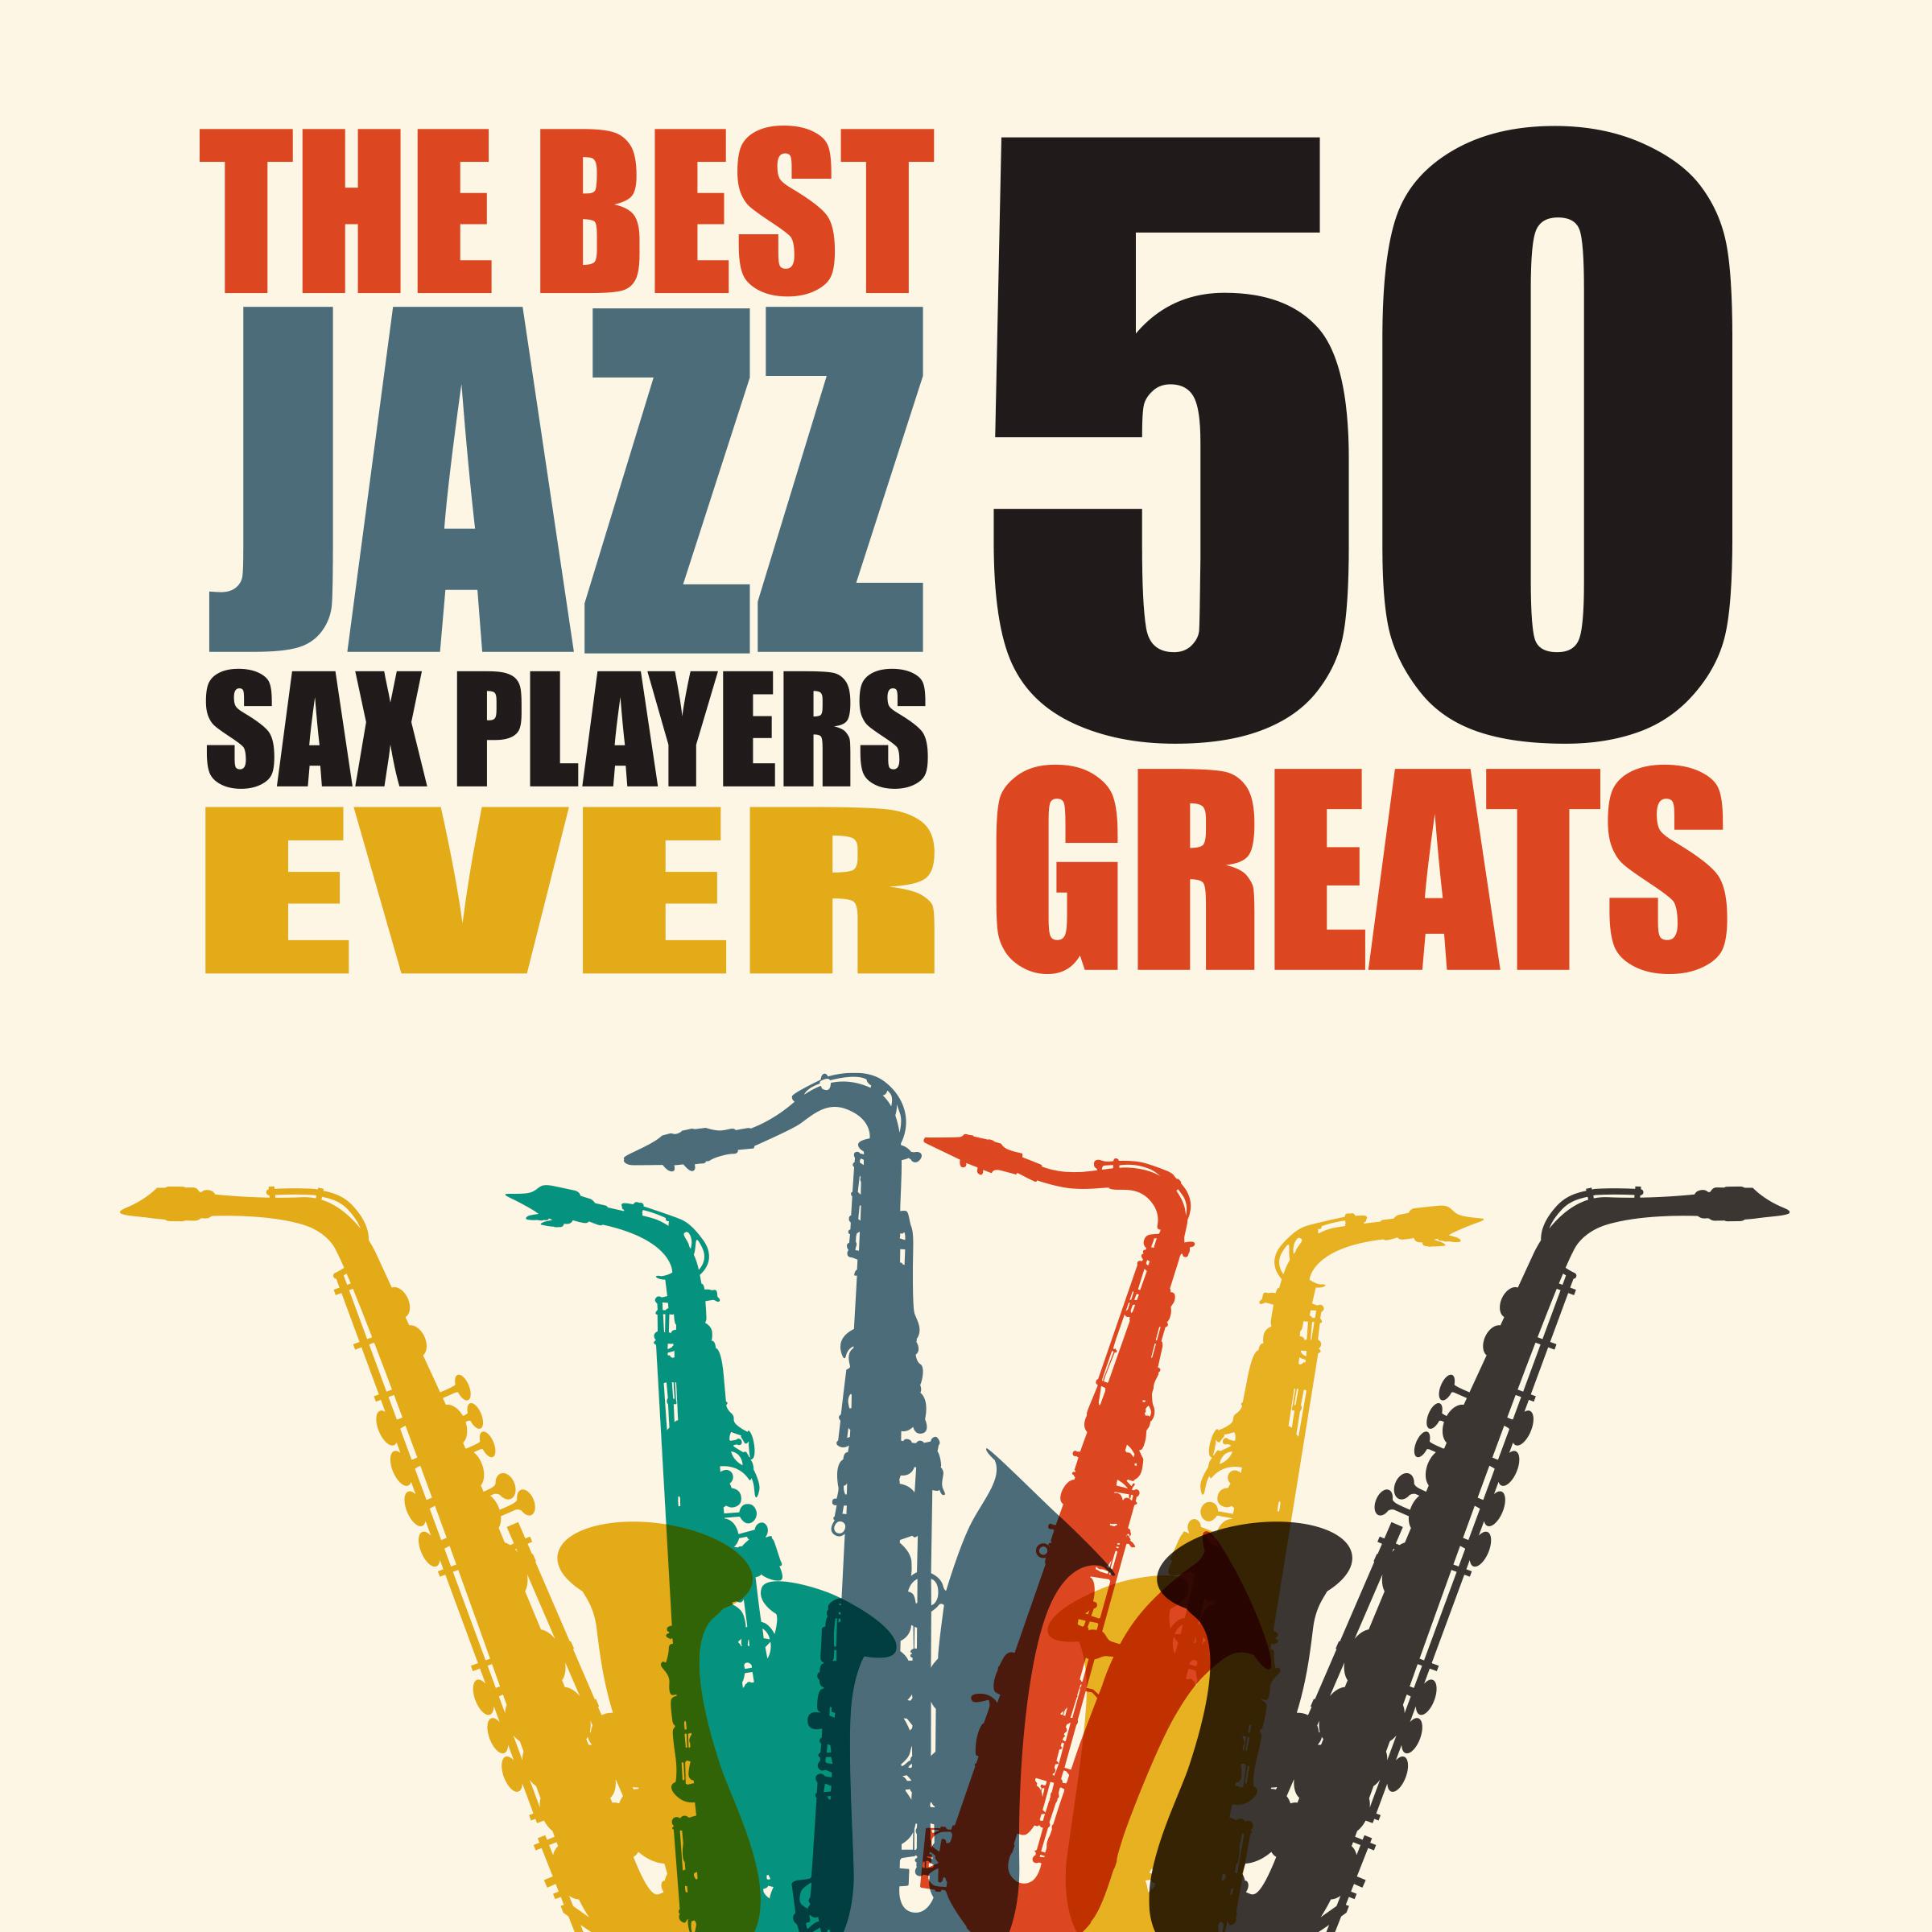 The Best Jazz Sax Players Ever - 50 Greats